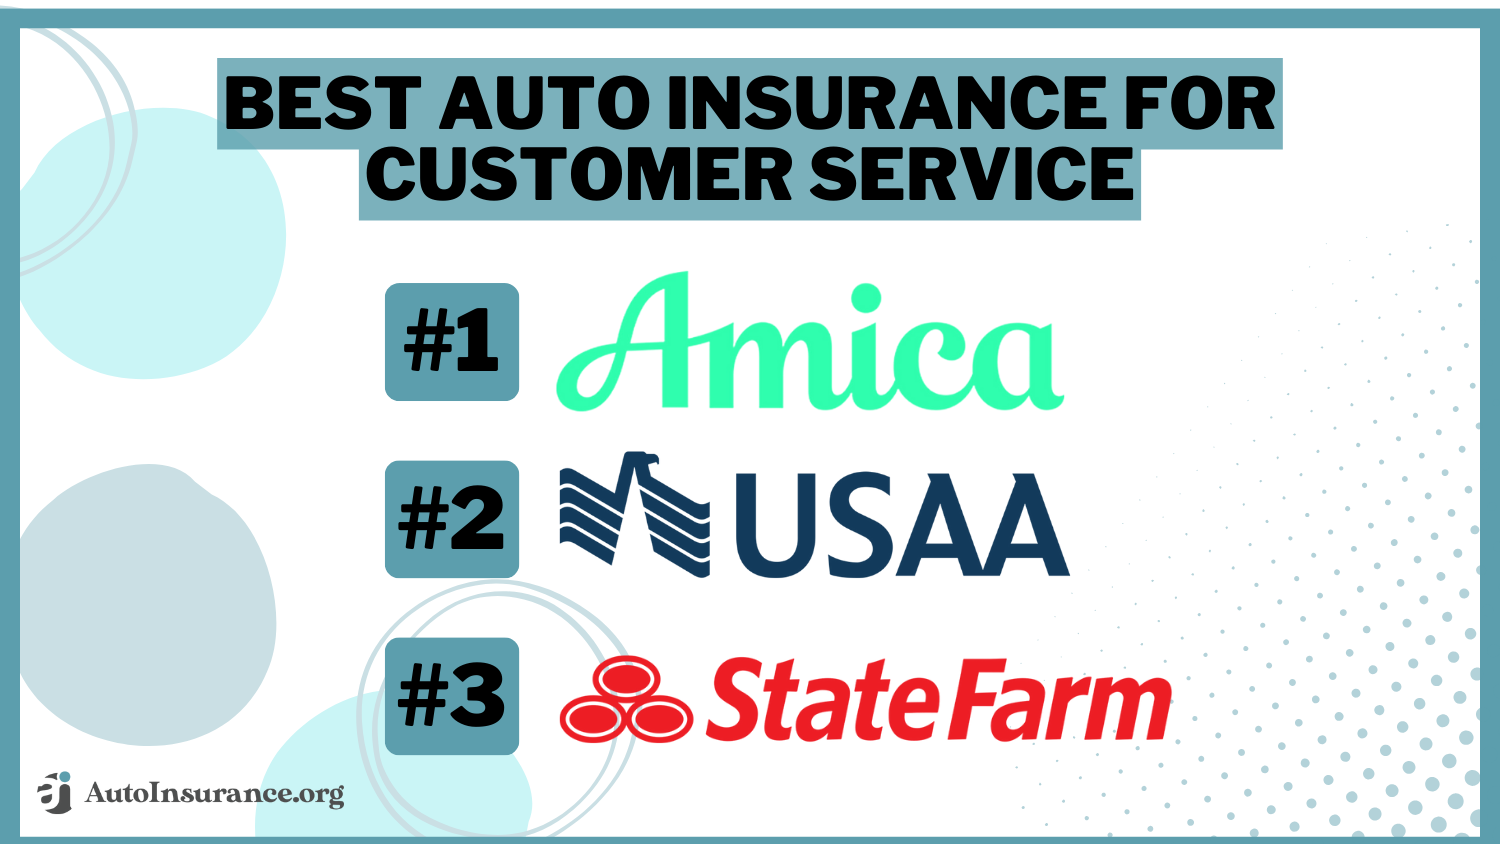 auto insurance companies with the best customer service: Amica, USAA, State Farm